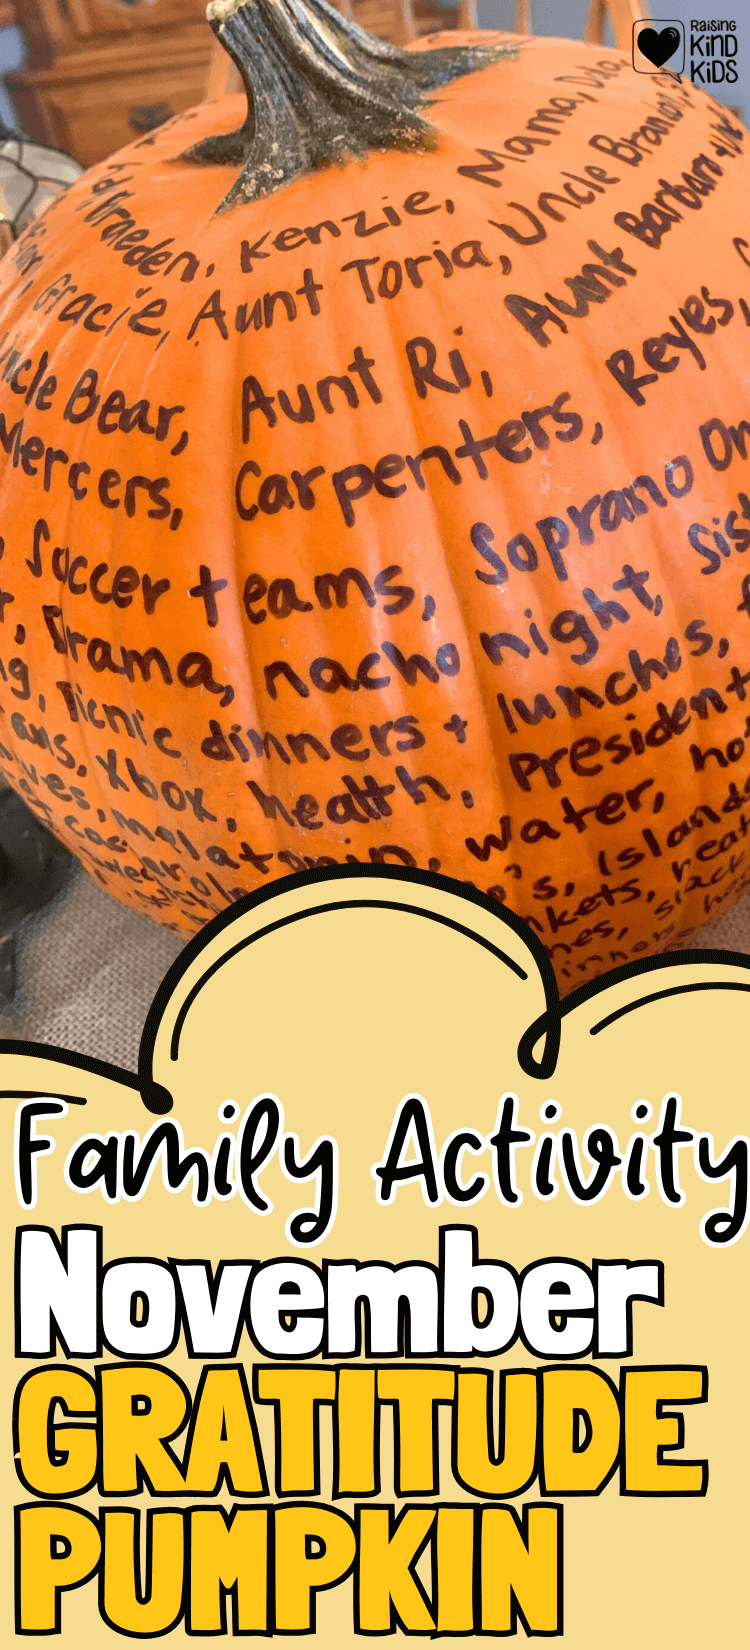 Encouraging gratitude is fun and festive with this Thanksgiving tradition of a gratitude pumpkin. Fill it out every November evening. It's a great family tradition to focus on gratitude. #gratitude #gratitudepumpkin #grateful #Thanksgivingidea #Thanksgivingtraditions #Thanksgivingforfamilies #Novembertraditions #coffeeandcarpool